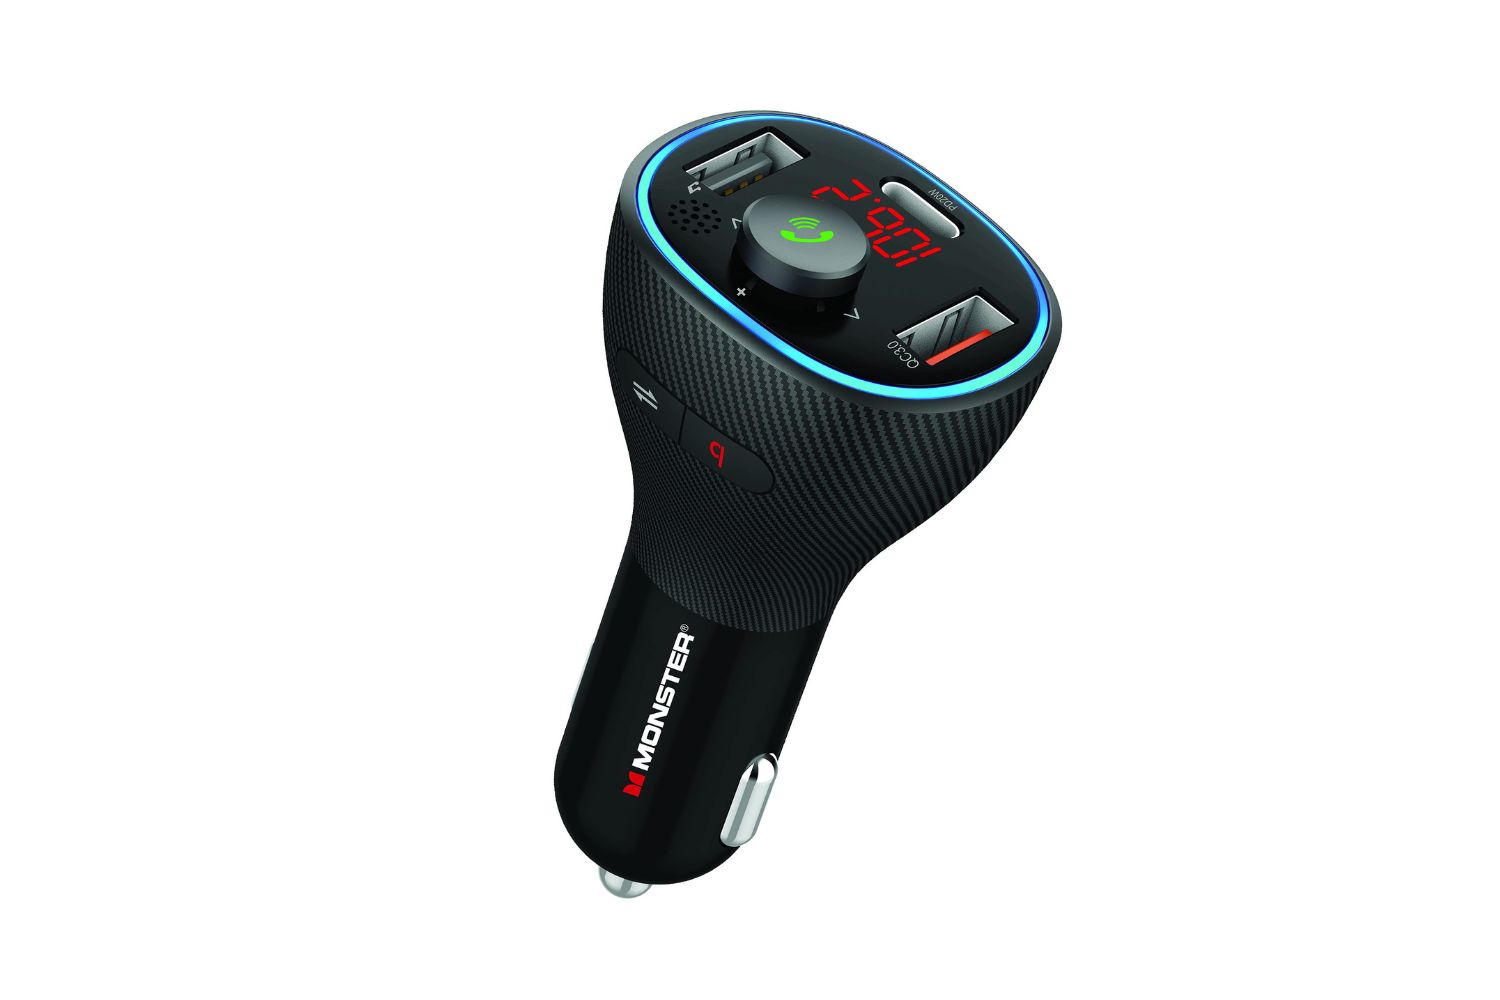 Monster Bluetooth FM Transmitter: Changing Stations Made Easy